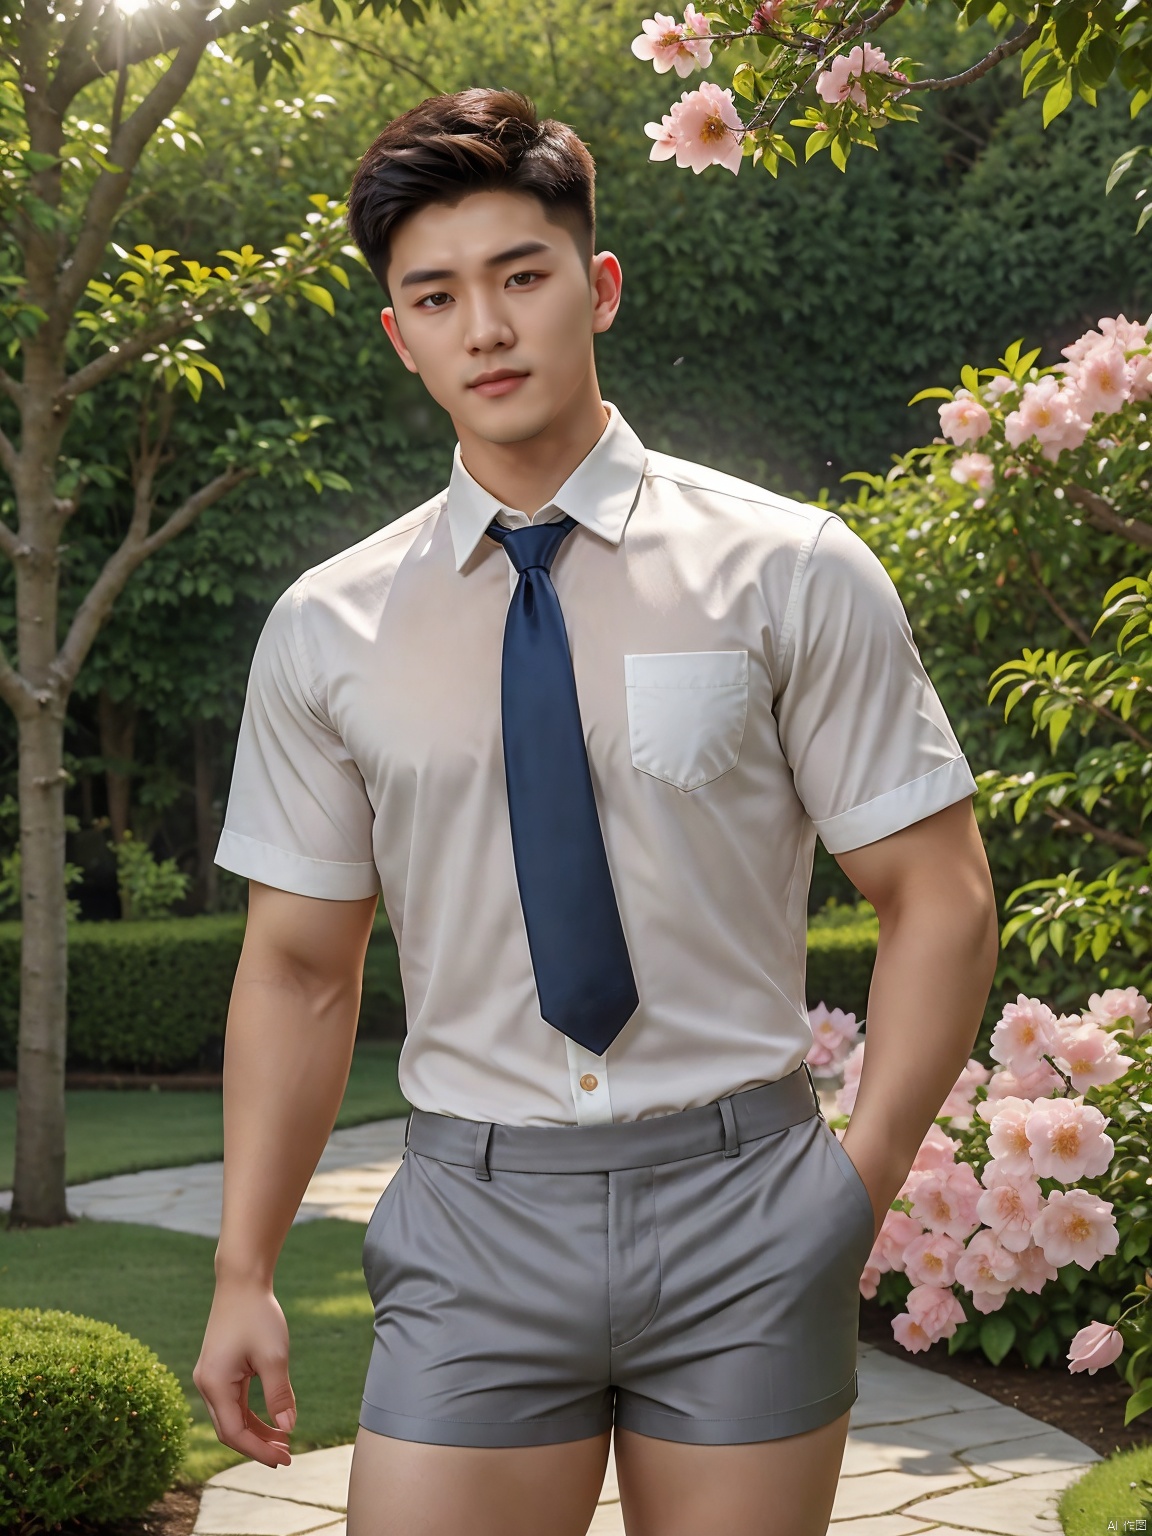  masterpiece,1 boy,Young,Handsome,Look at me,Short hair,Tea hair,Students,White shirt,Striped tie,Gray shorts,Stand,Outdoor,Garden,Peach tree,Flying petals,Light and shadow,HDR,textured skin,super detail,best quality, asuo, Asuo, fu, Pink Mecha, sufei, CodeMen278, hand101